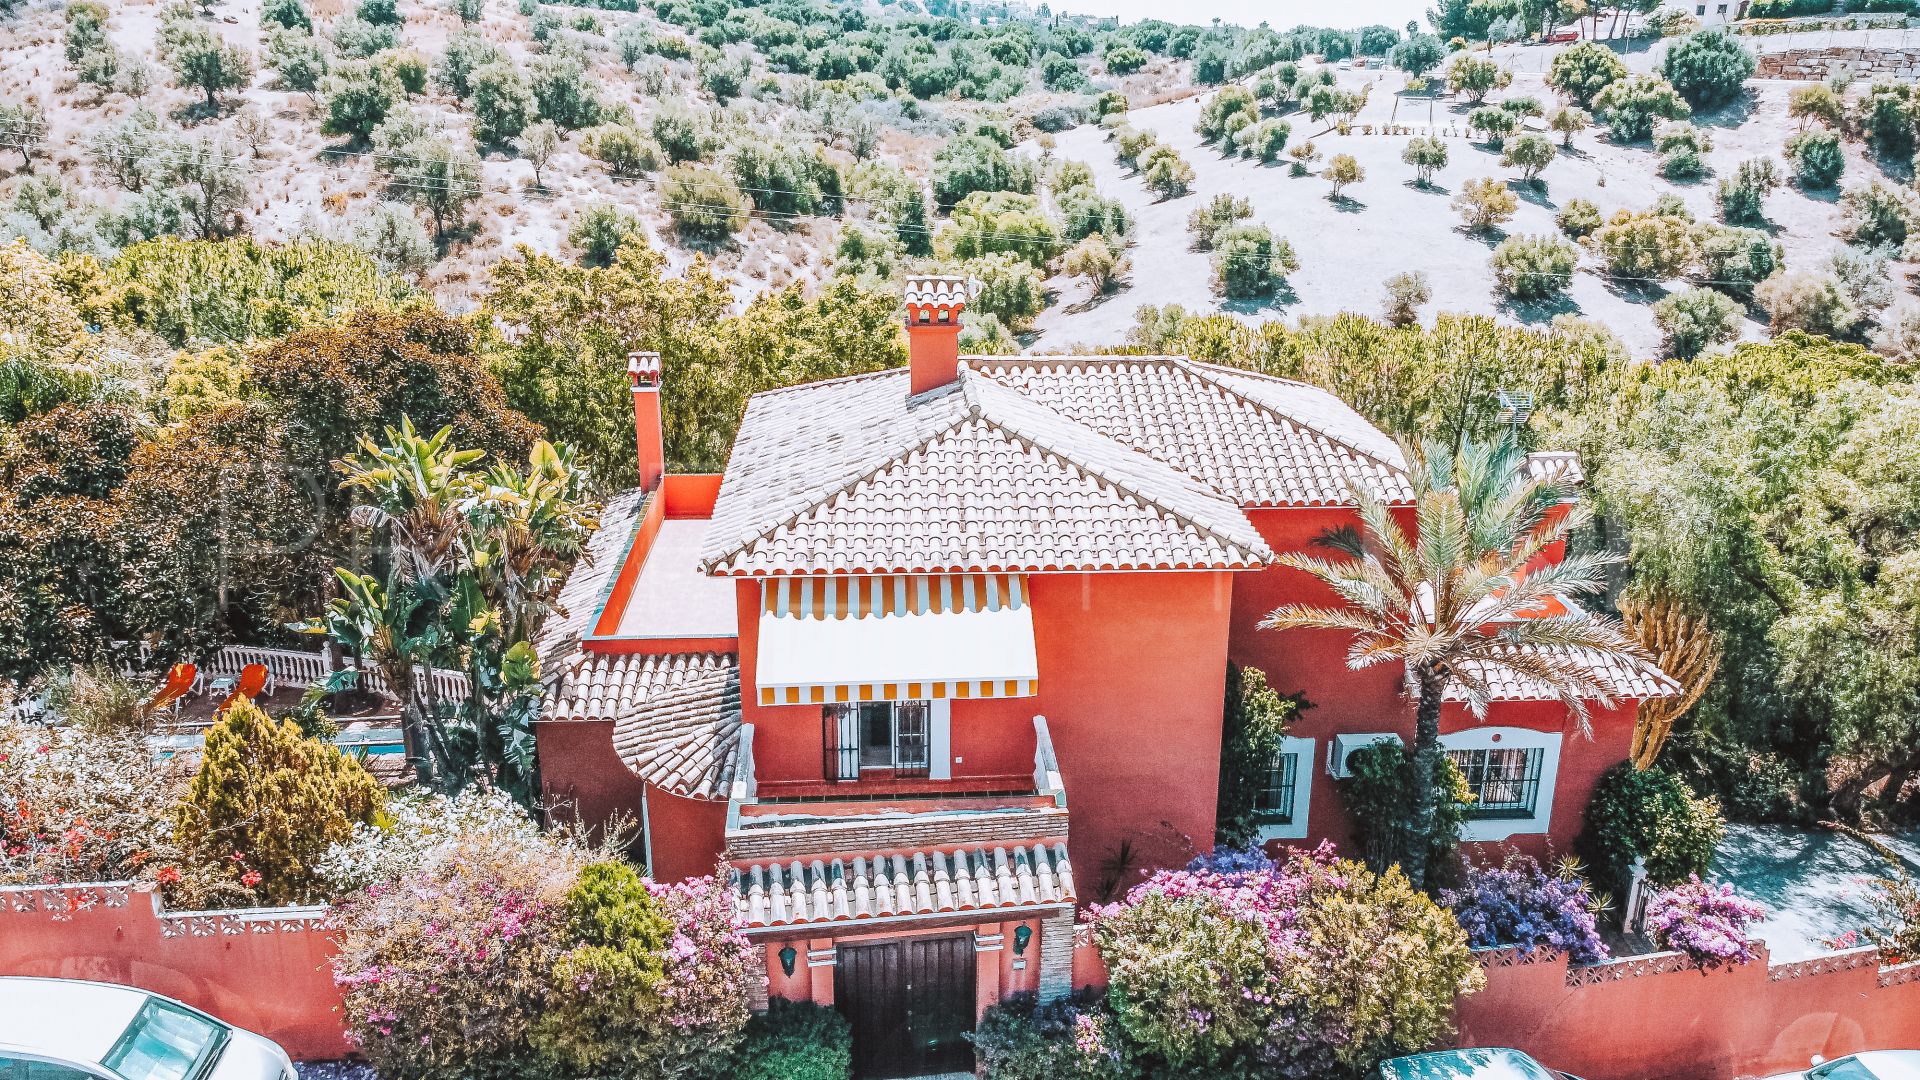 For sale house in Mijas Golf with 8 bedrooms